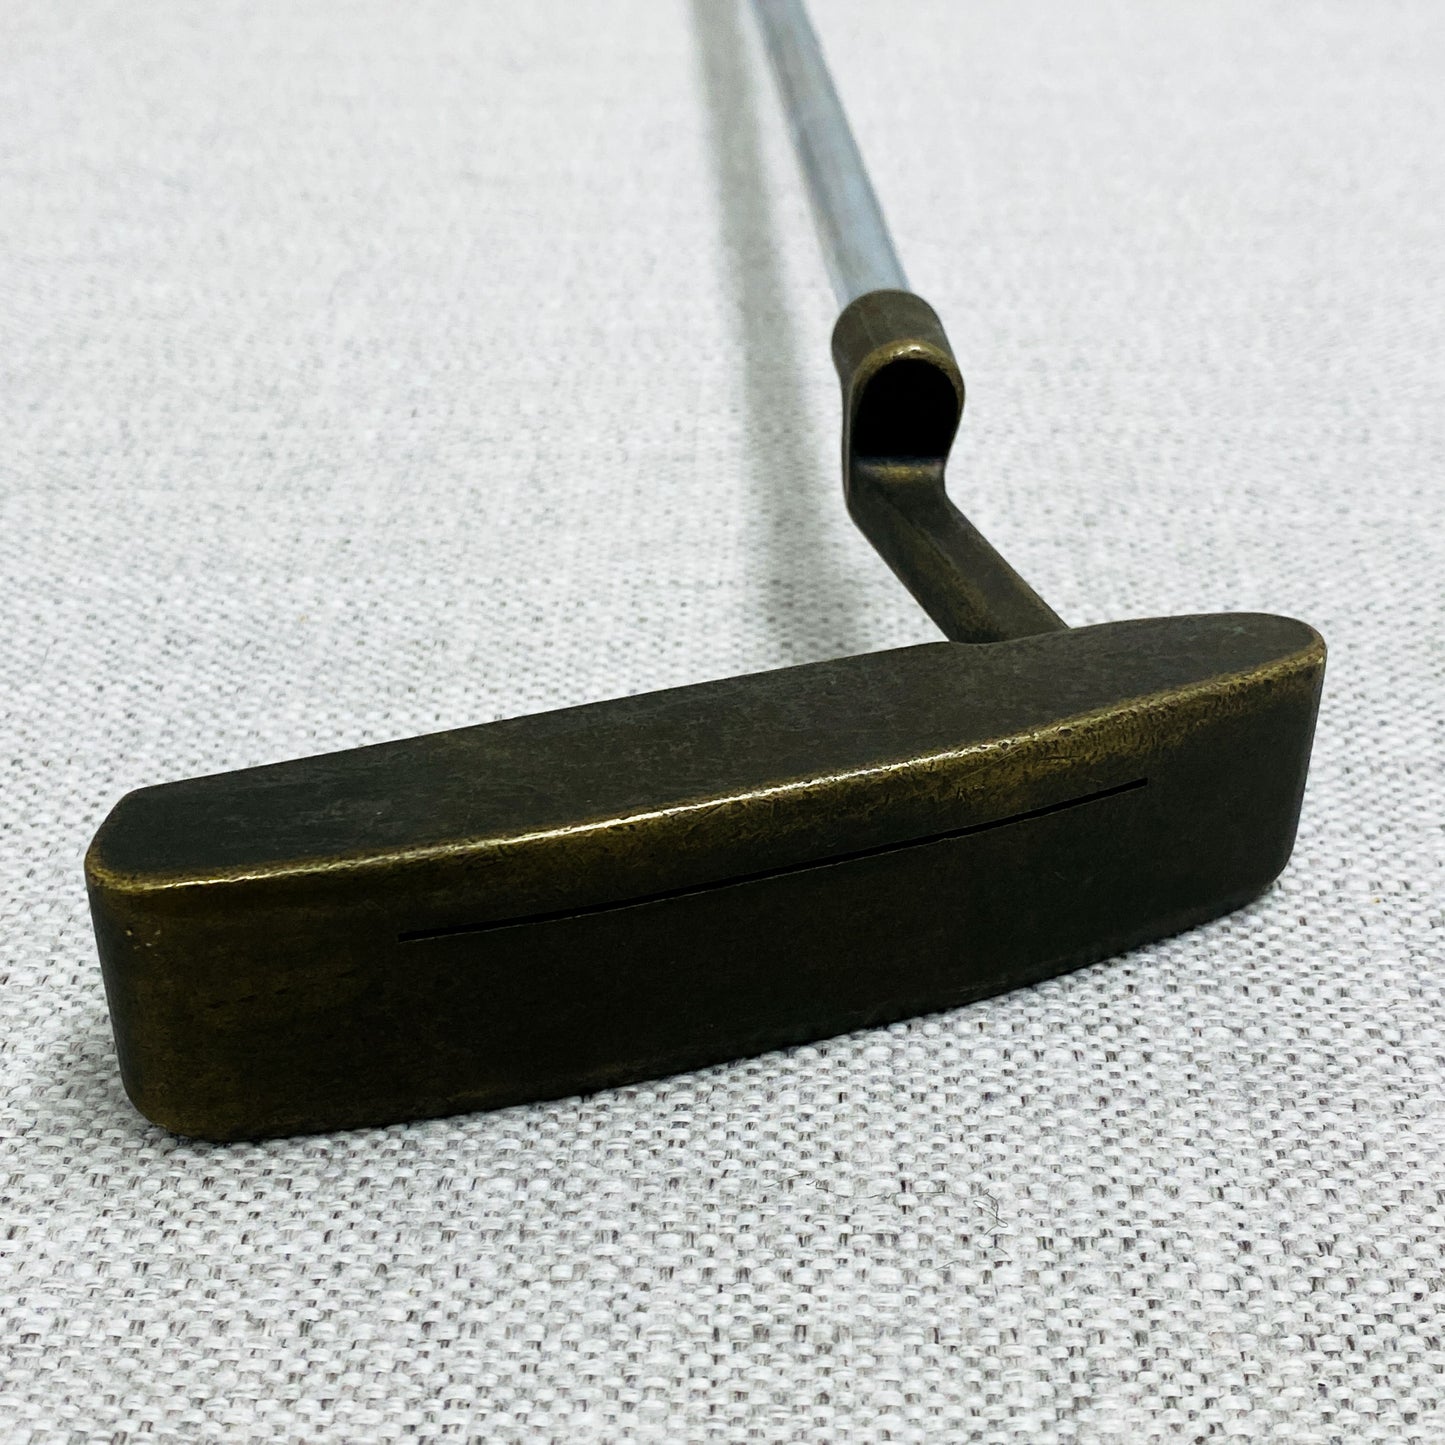 PING Anser Manganese Bronze Putter. 35 inch - Good Condition # T1019